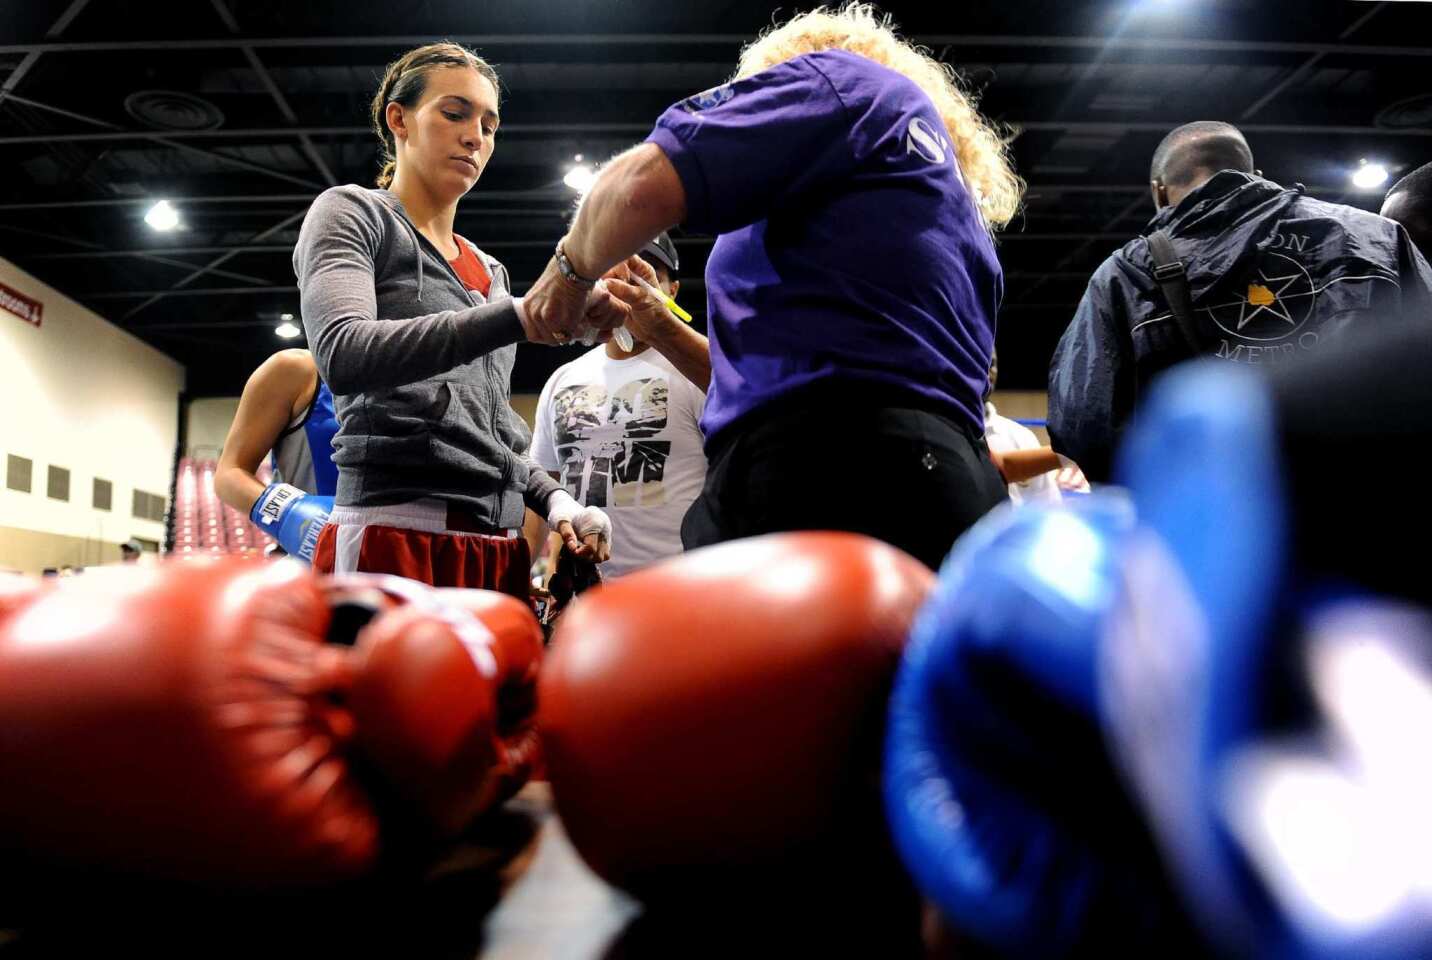 Mikaela Mayer, 21, has her wraps checked before being issued gloves at the Police Athletic League national boxing tournament in Toledo, Ohio, in October.